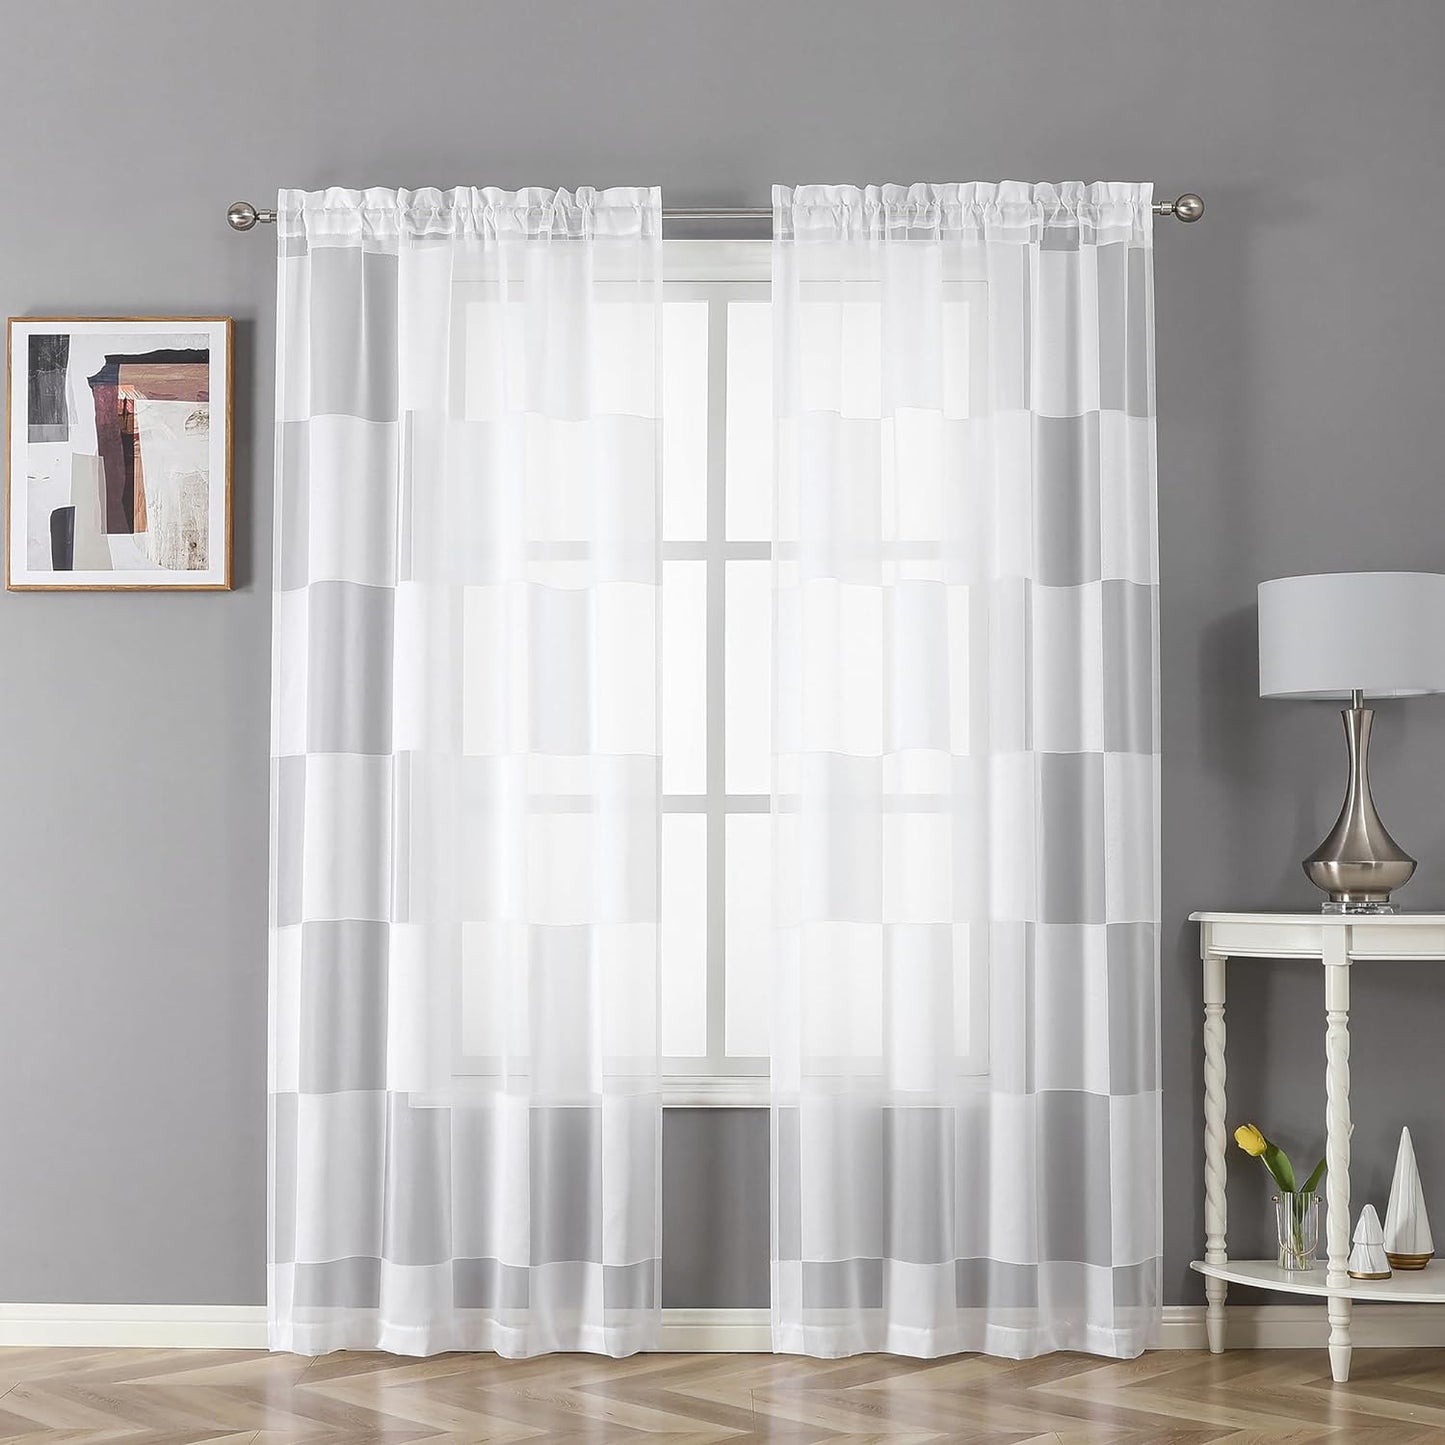 OVZME Sage Green Sheer Bedroom Curtains 84 Inch Length 2 Panels Set, Dual Rod Pocket Clip Checkered Window Curtains for Living Room, Light Filtering & Privacy Sheer Green Drapes, Each 42W X 84L  OVZME White 42W X 72L 